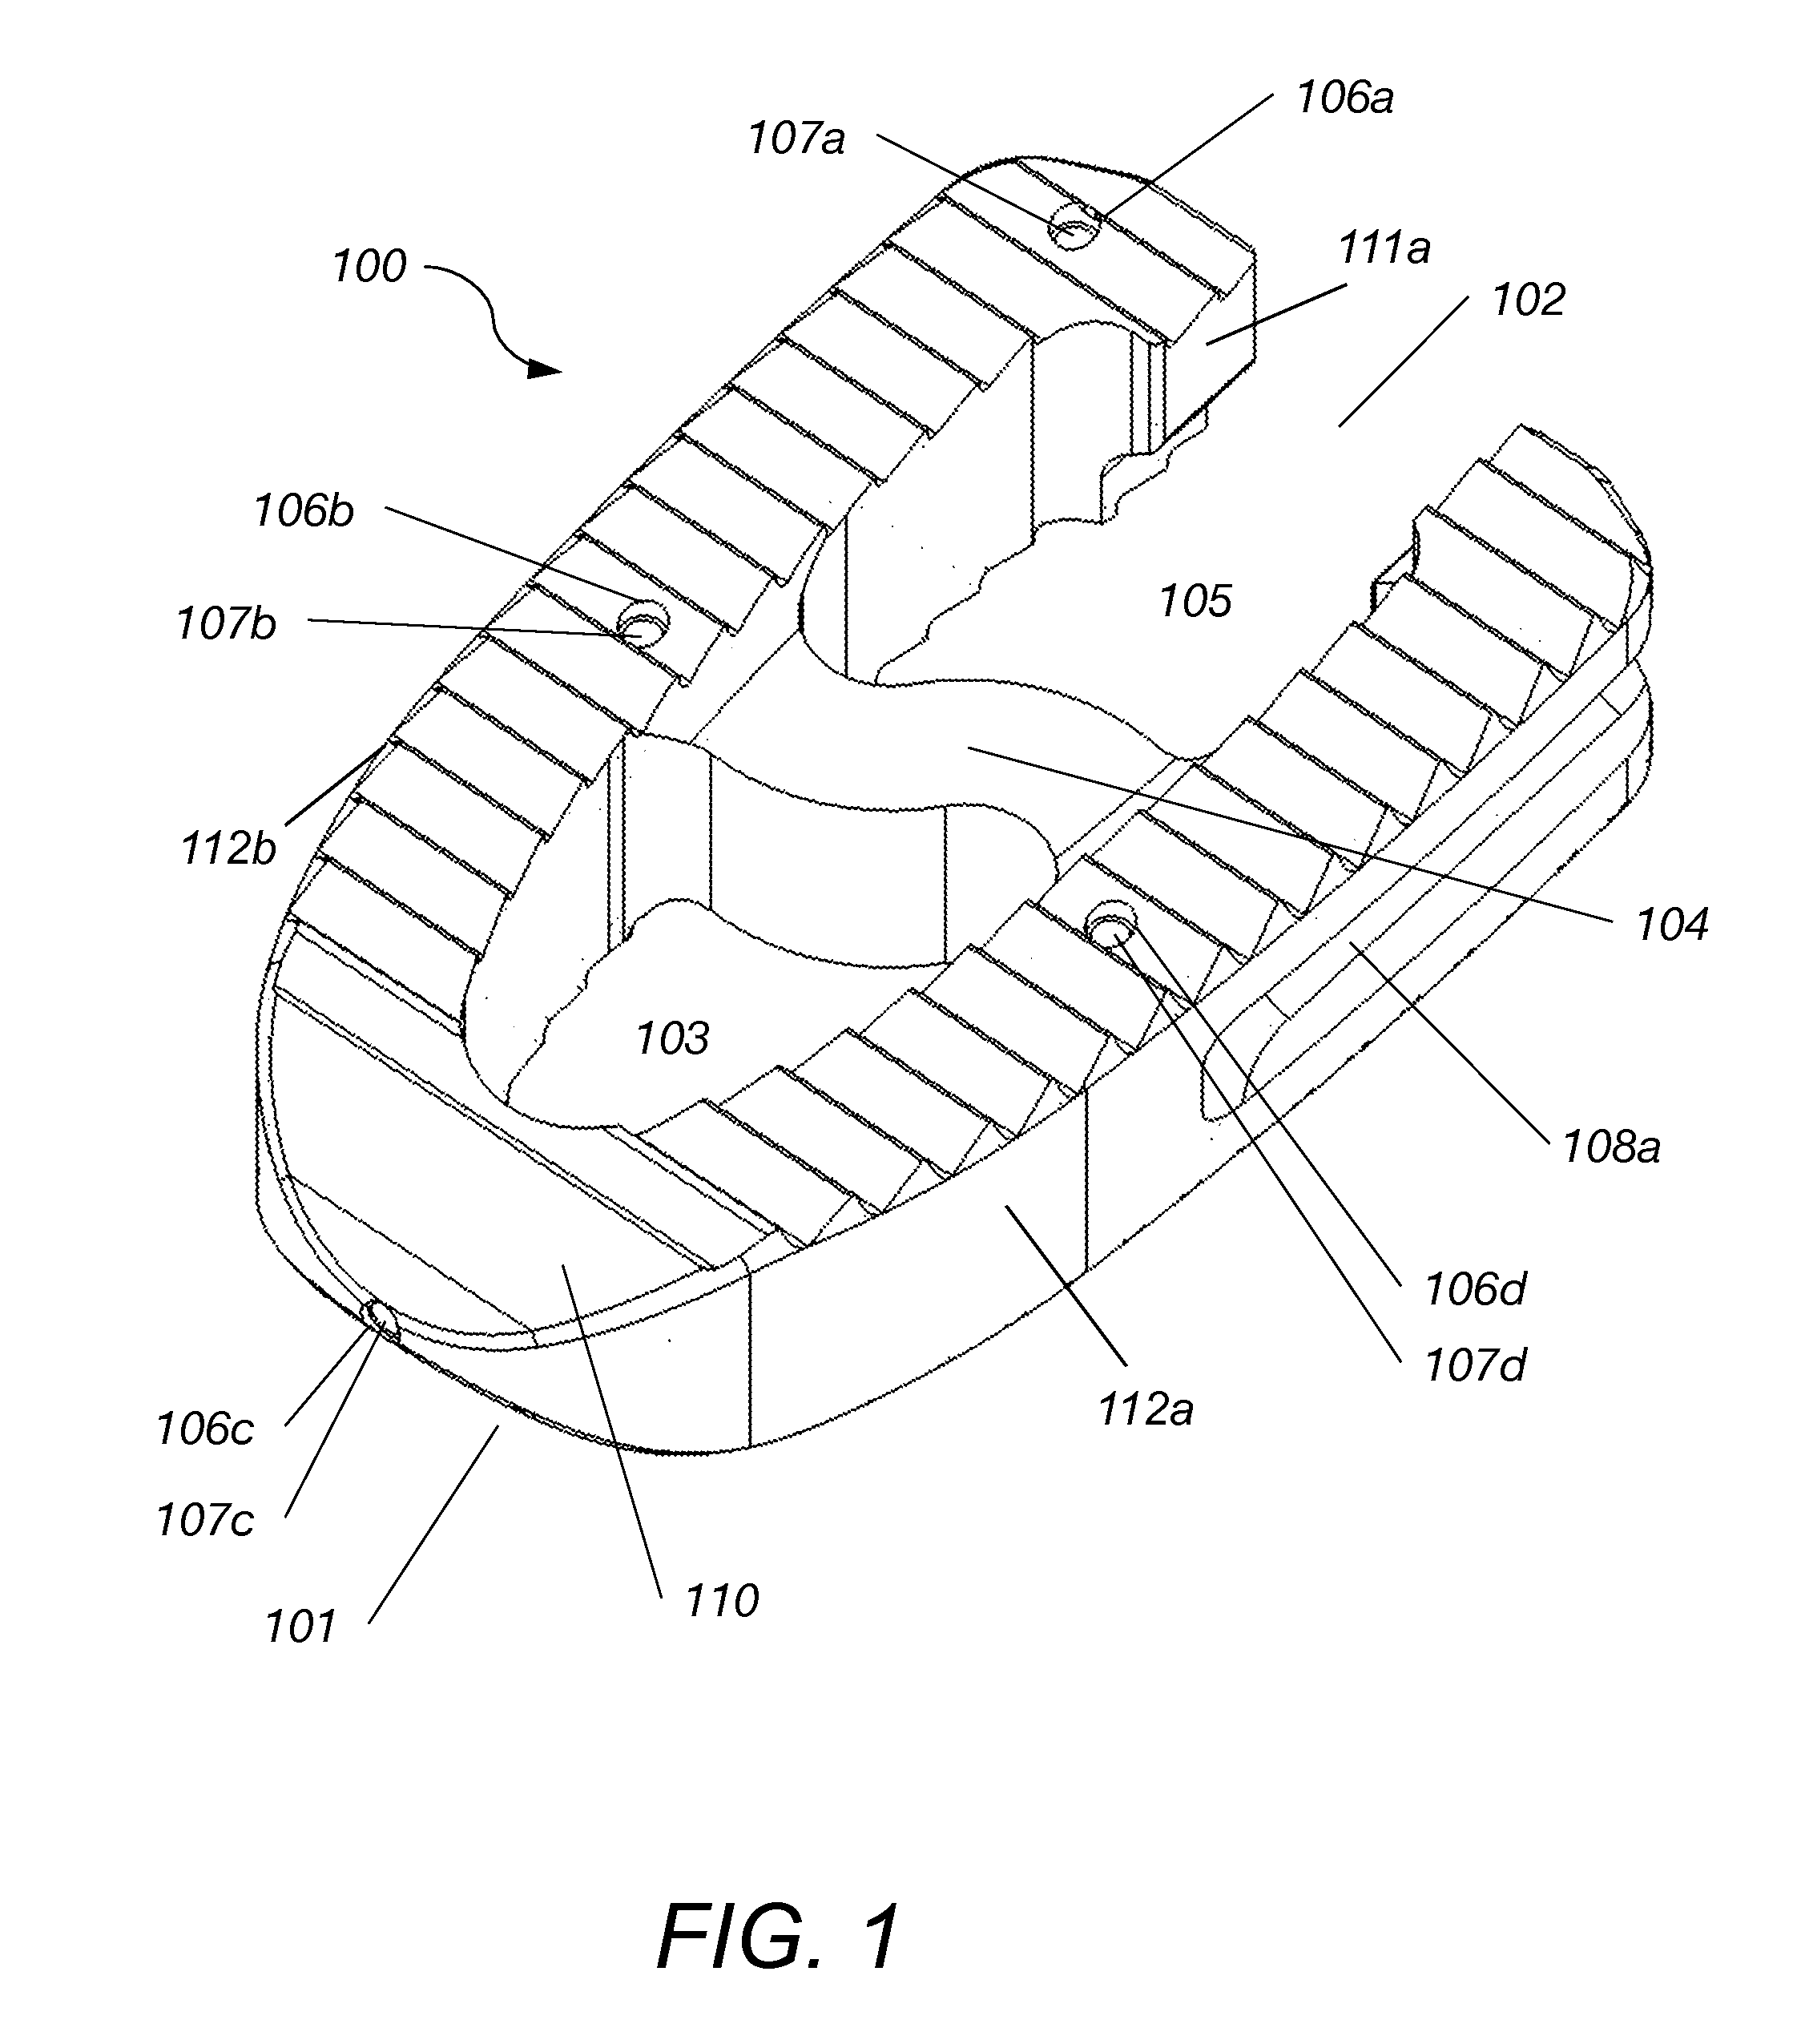 System and method for an intervertebral implant assembly